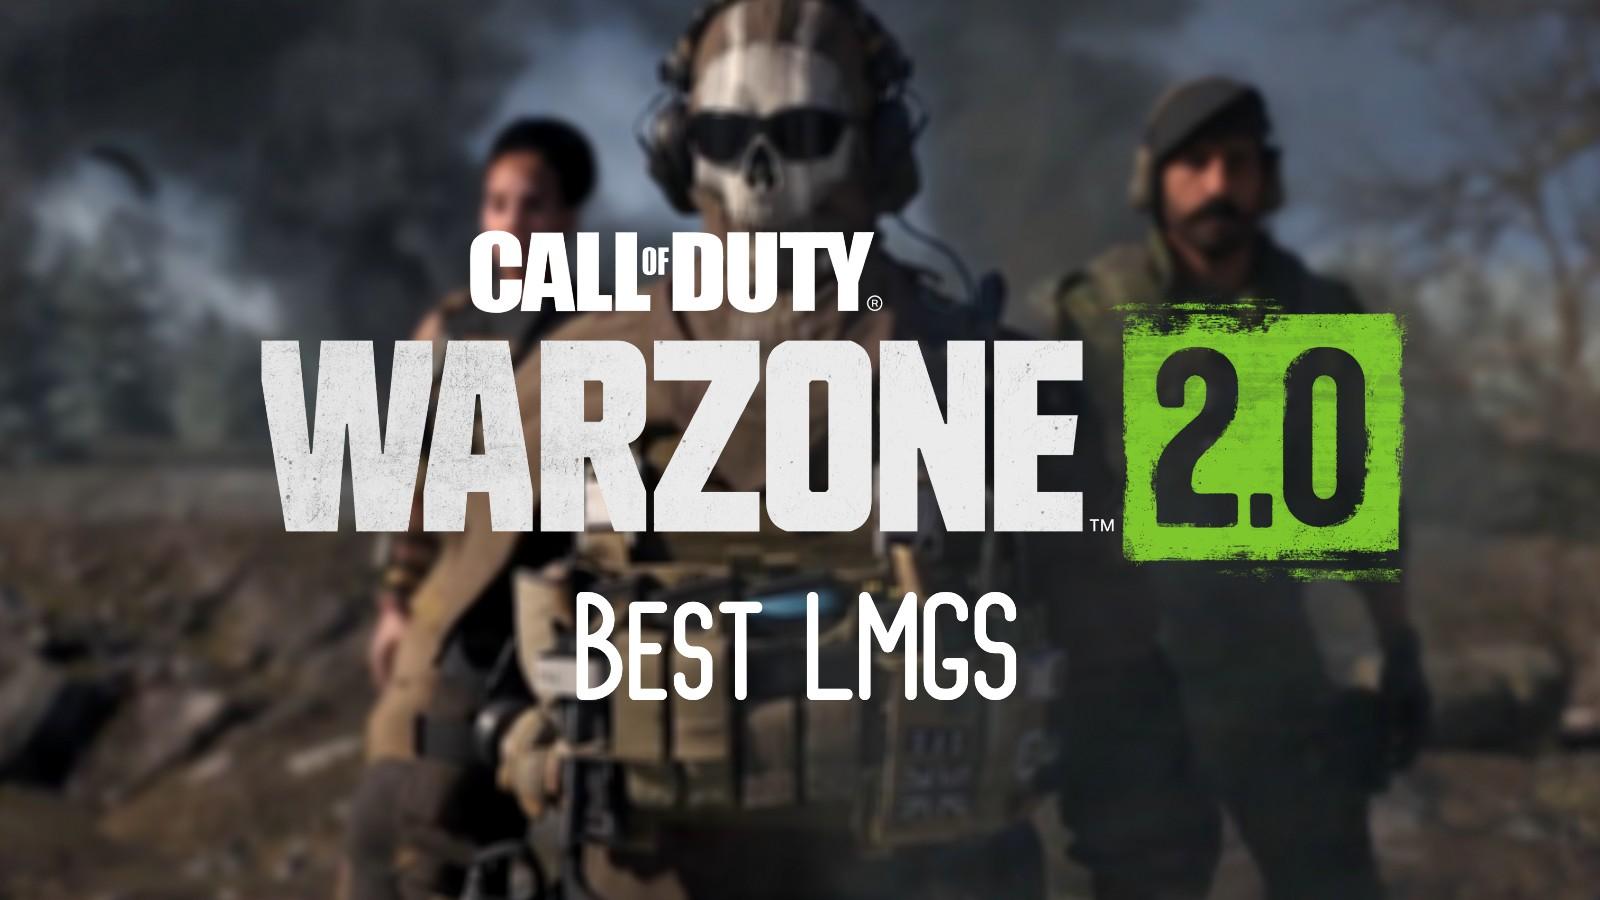 Best Meta LMG loadouts for season 6 - All LMGs ranked with the